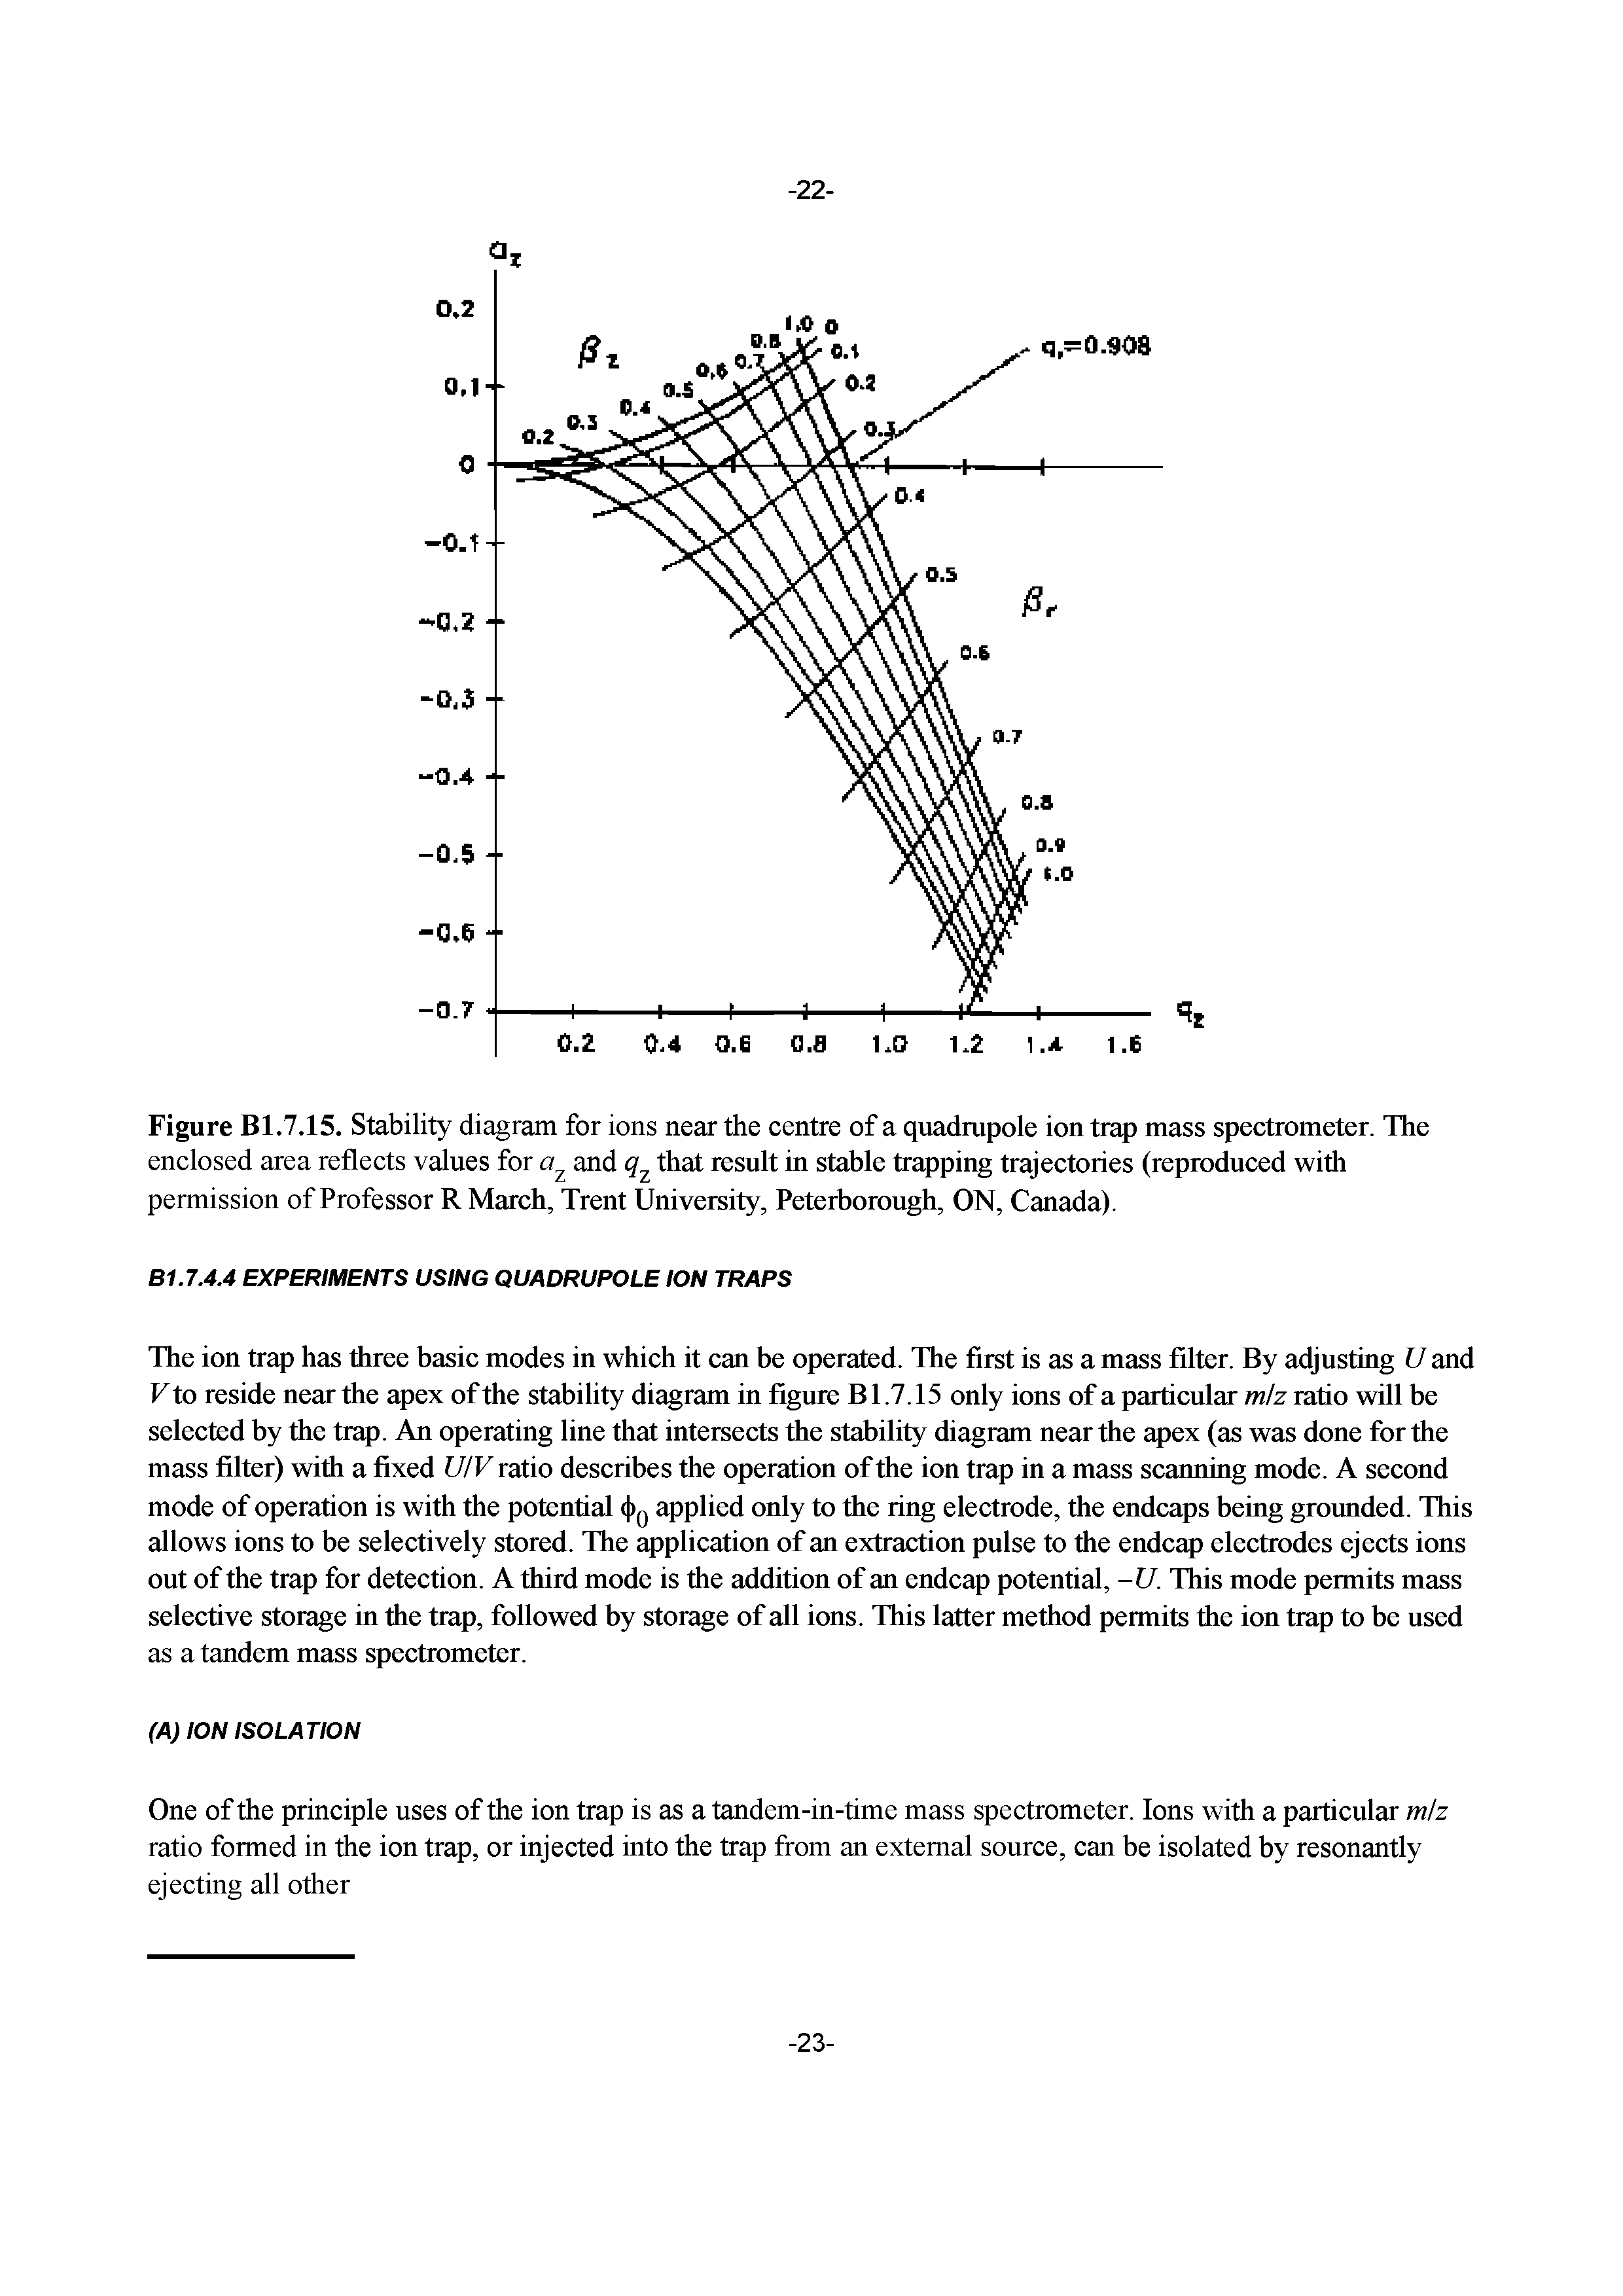 Figure Bl.7.15. Stability diagram for ions near the centre of a quadrupole ion trap mass spectrometer. The enclosed area reflects values for and that result in stable trapping trajectories (reproduced with permission of Professor R March, Trent University, Peterborough, ON, Canada).